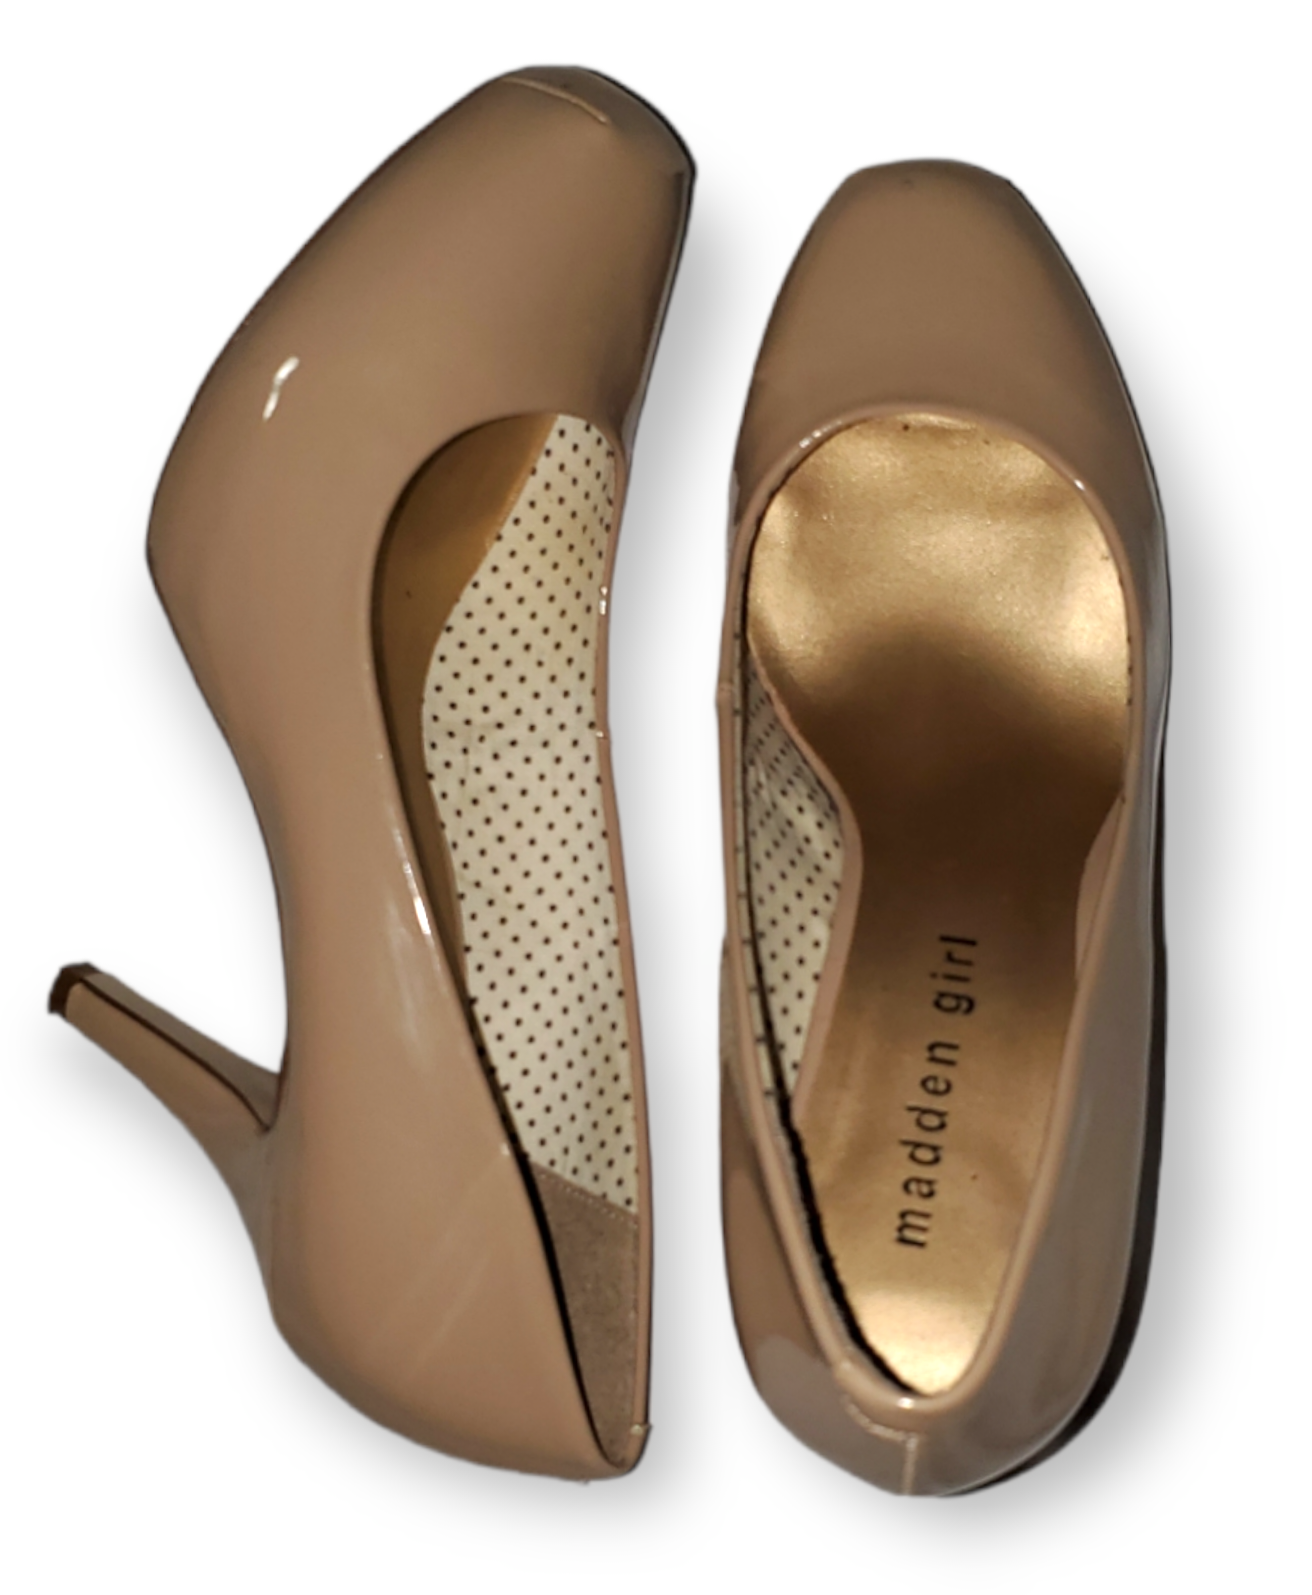 Madden Girl Nude Pumps|Used